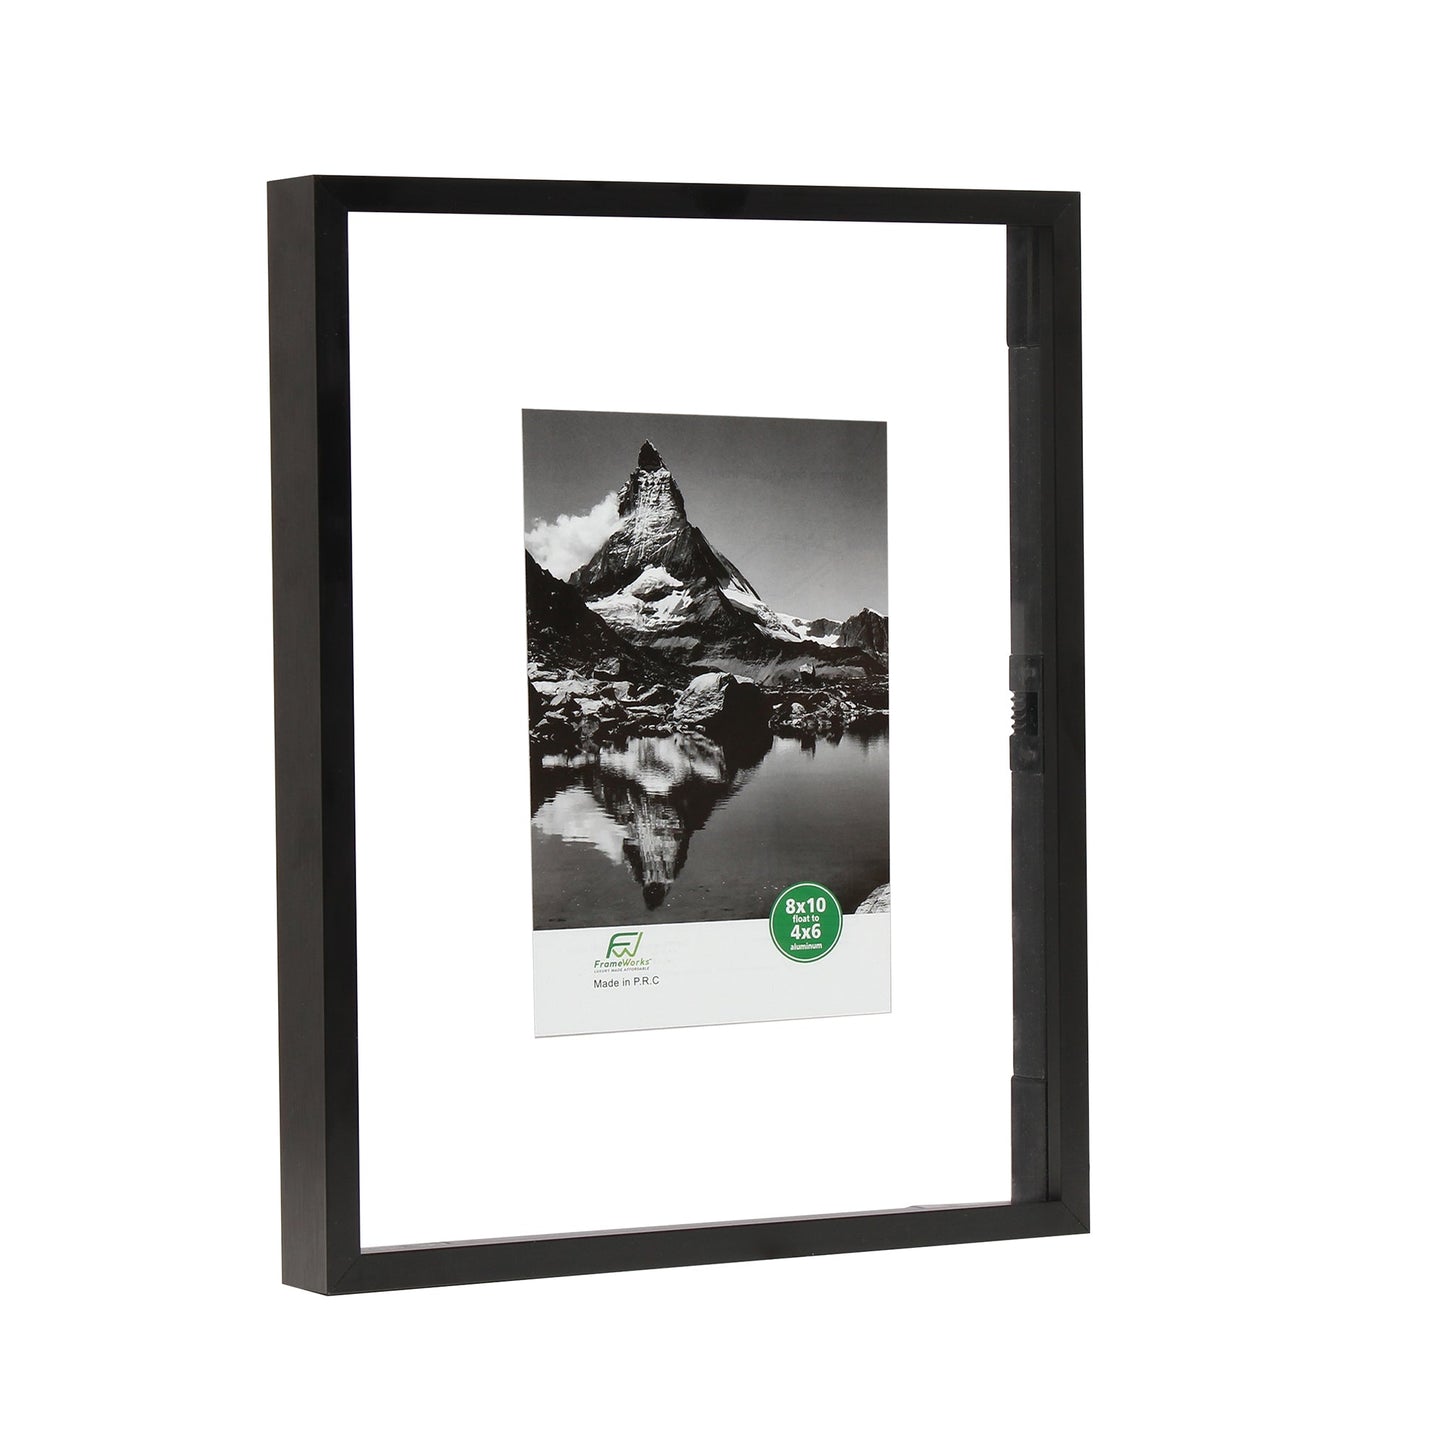 8" x 10" Deluxe Black Aluminum Contemporary Floating Picture Frame